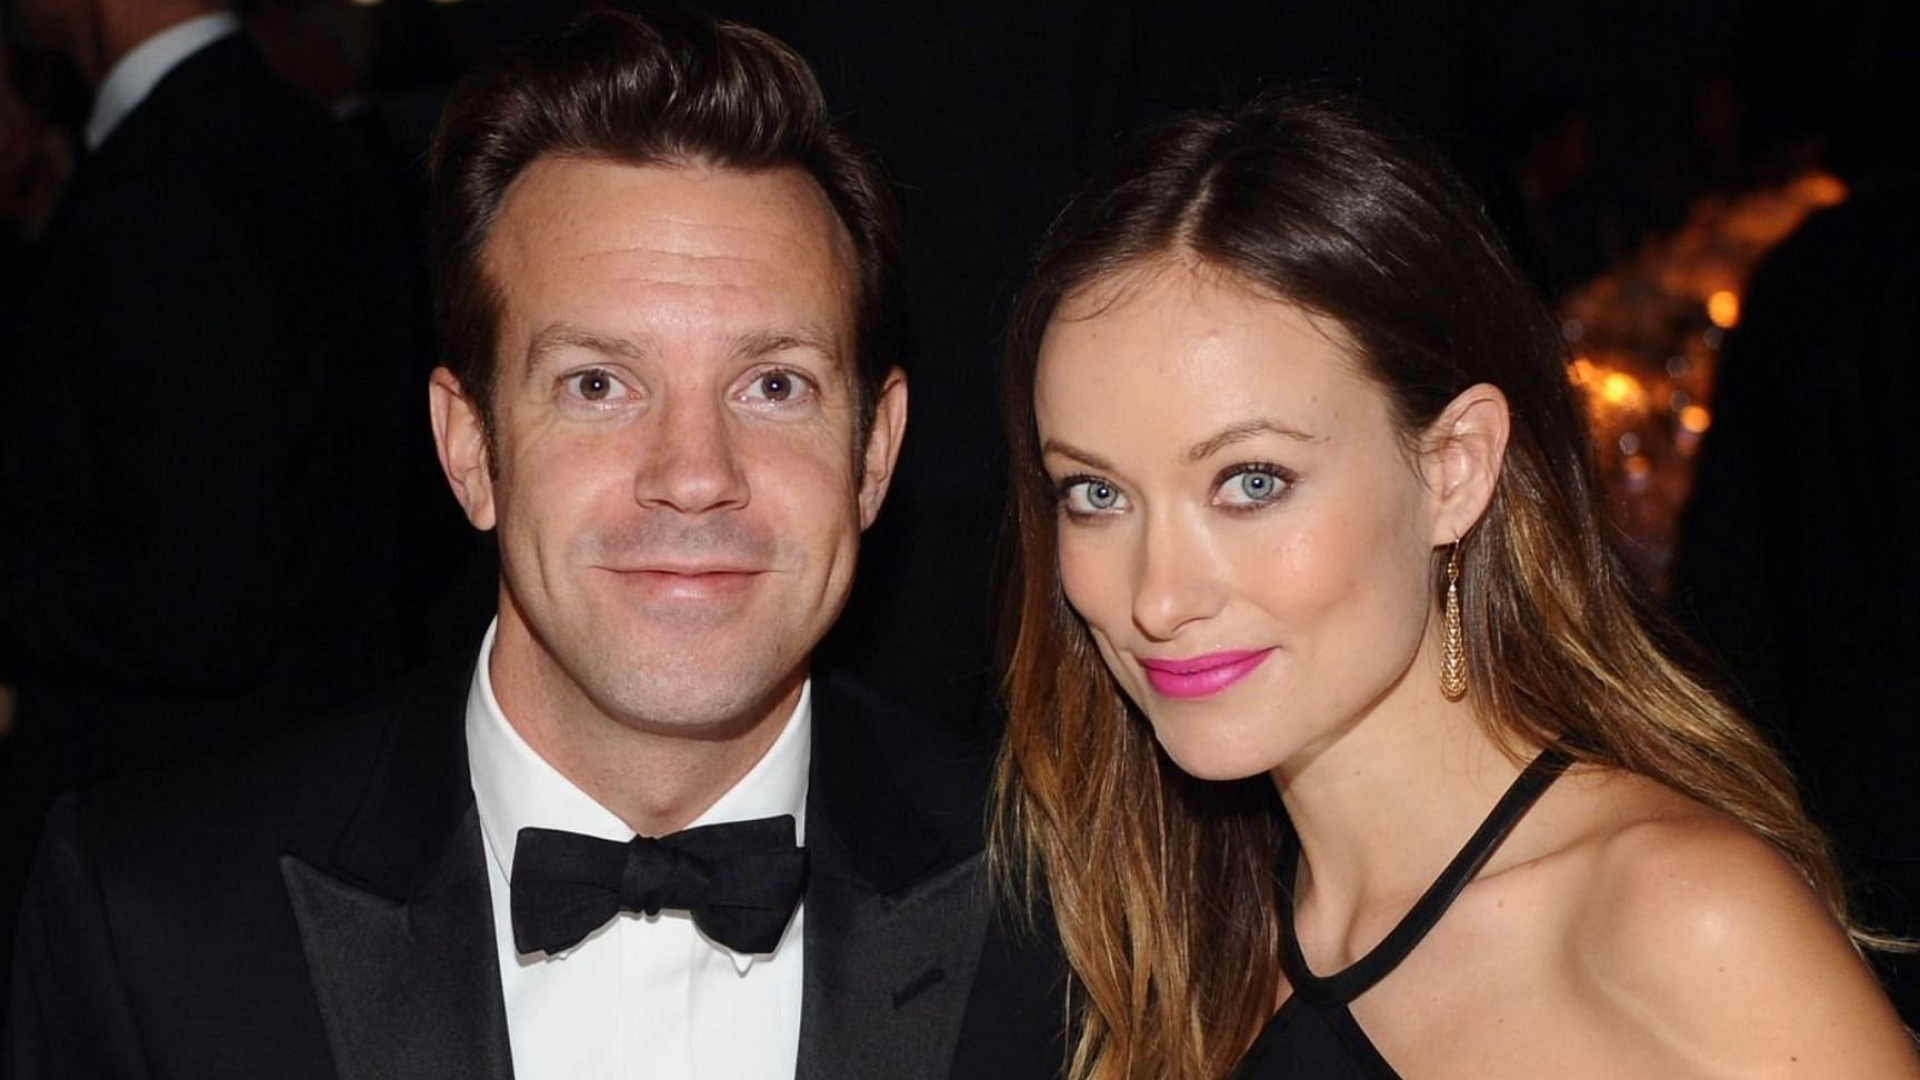 Jason Sudeikis, Olivia Wilde, Why did they break up, On stage at CinemaCon, 1920x1080 Full HD Desktop